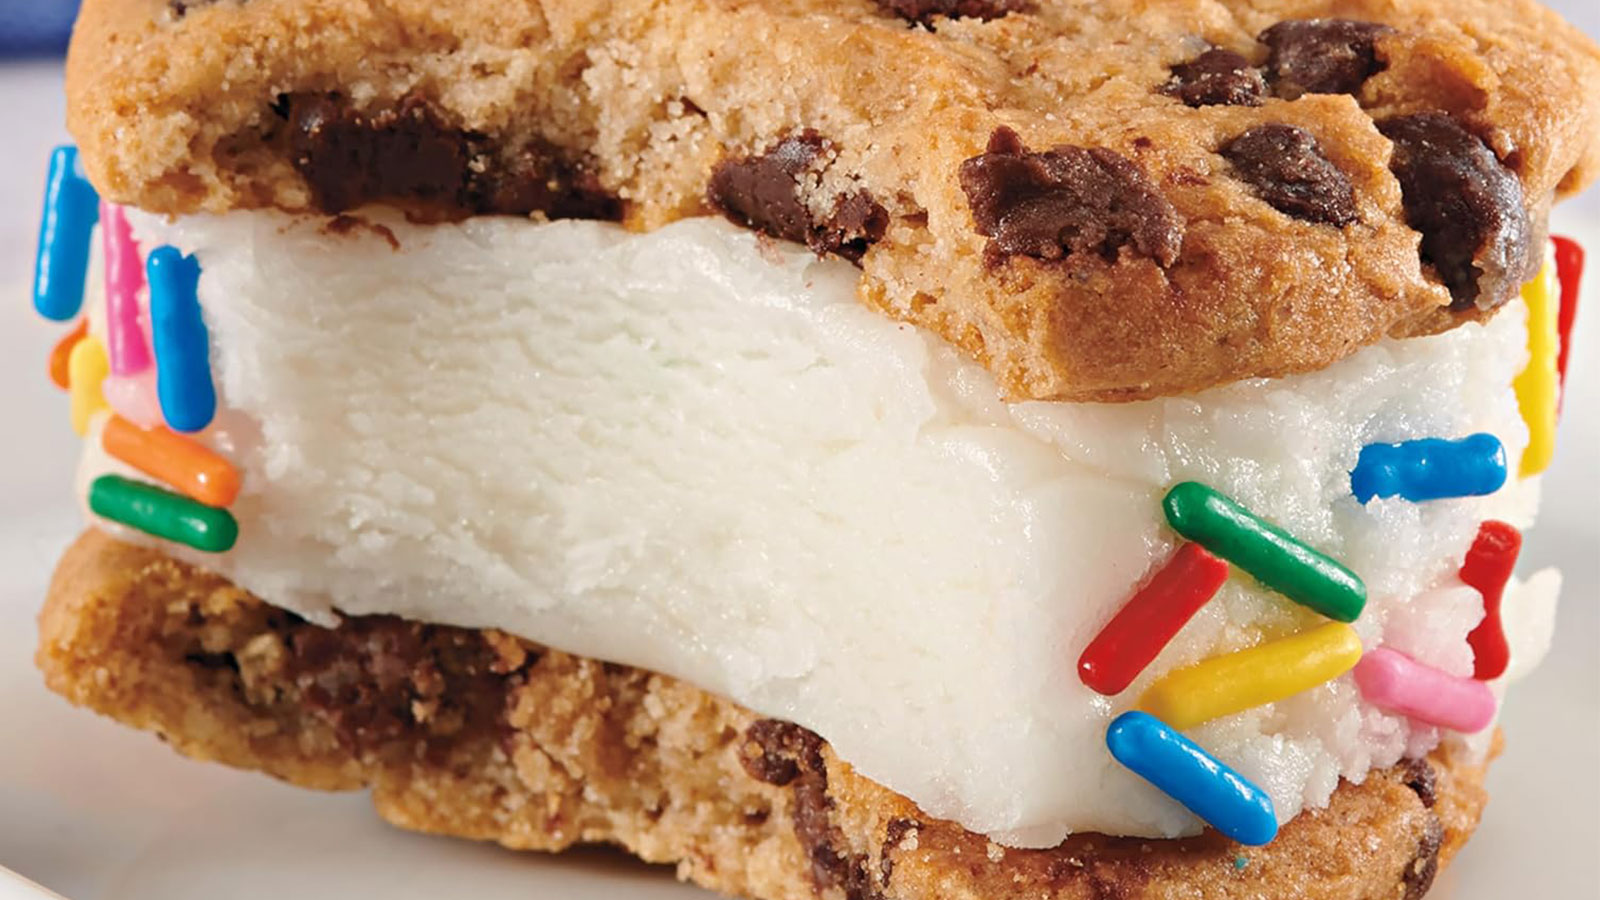 An ice cream sandwich made between two cookies with sprinkles on the outside close-up